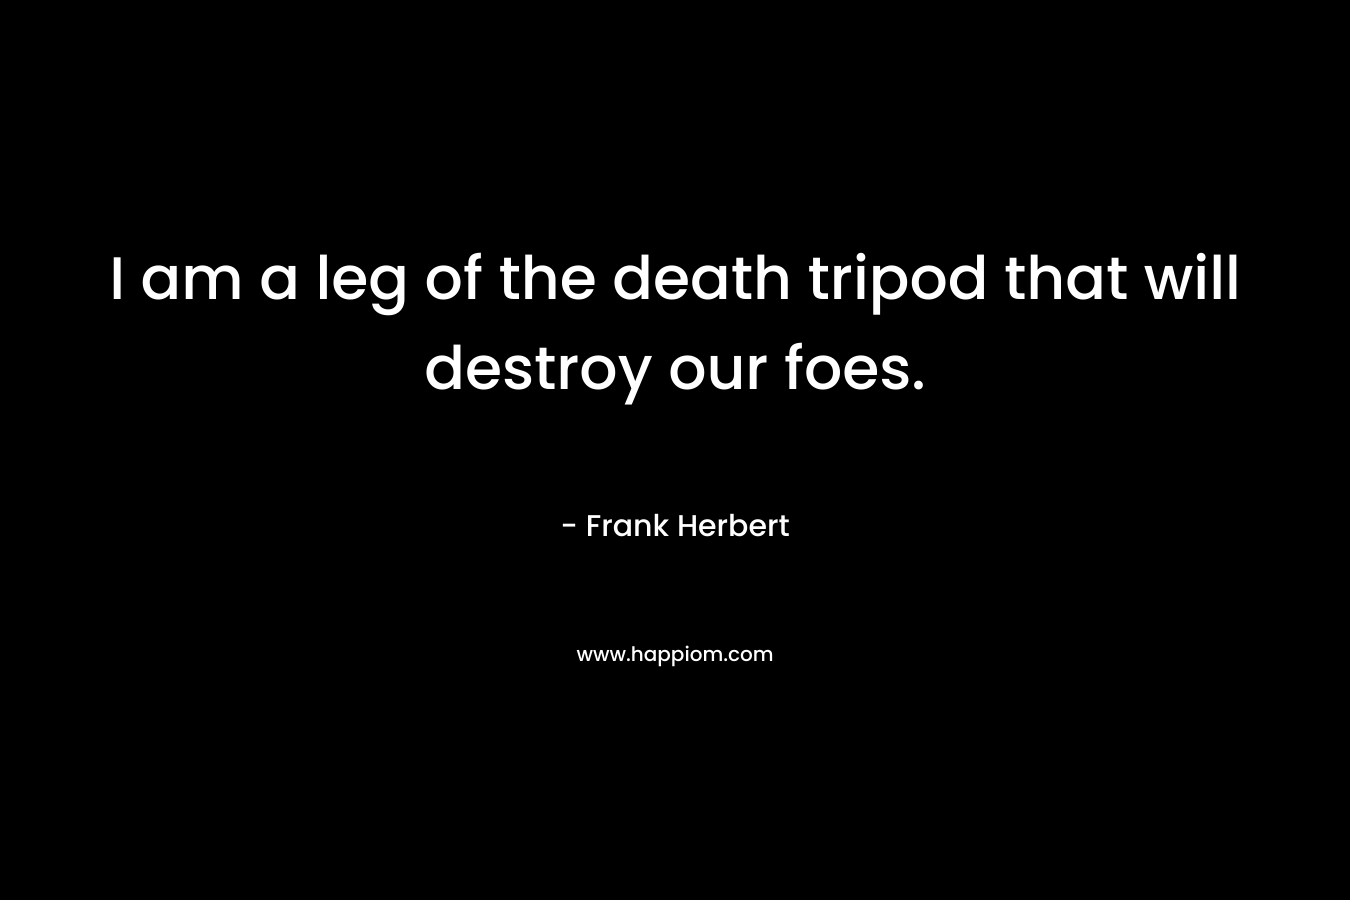 I am a leg of the death tripod that will destroy our foes. – Frank Herbert